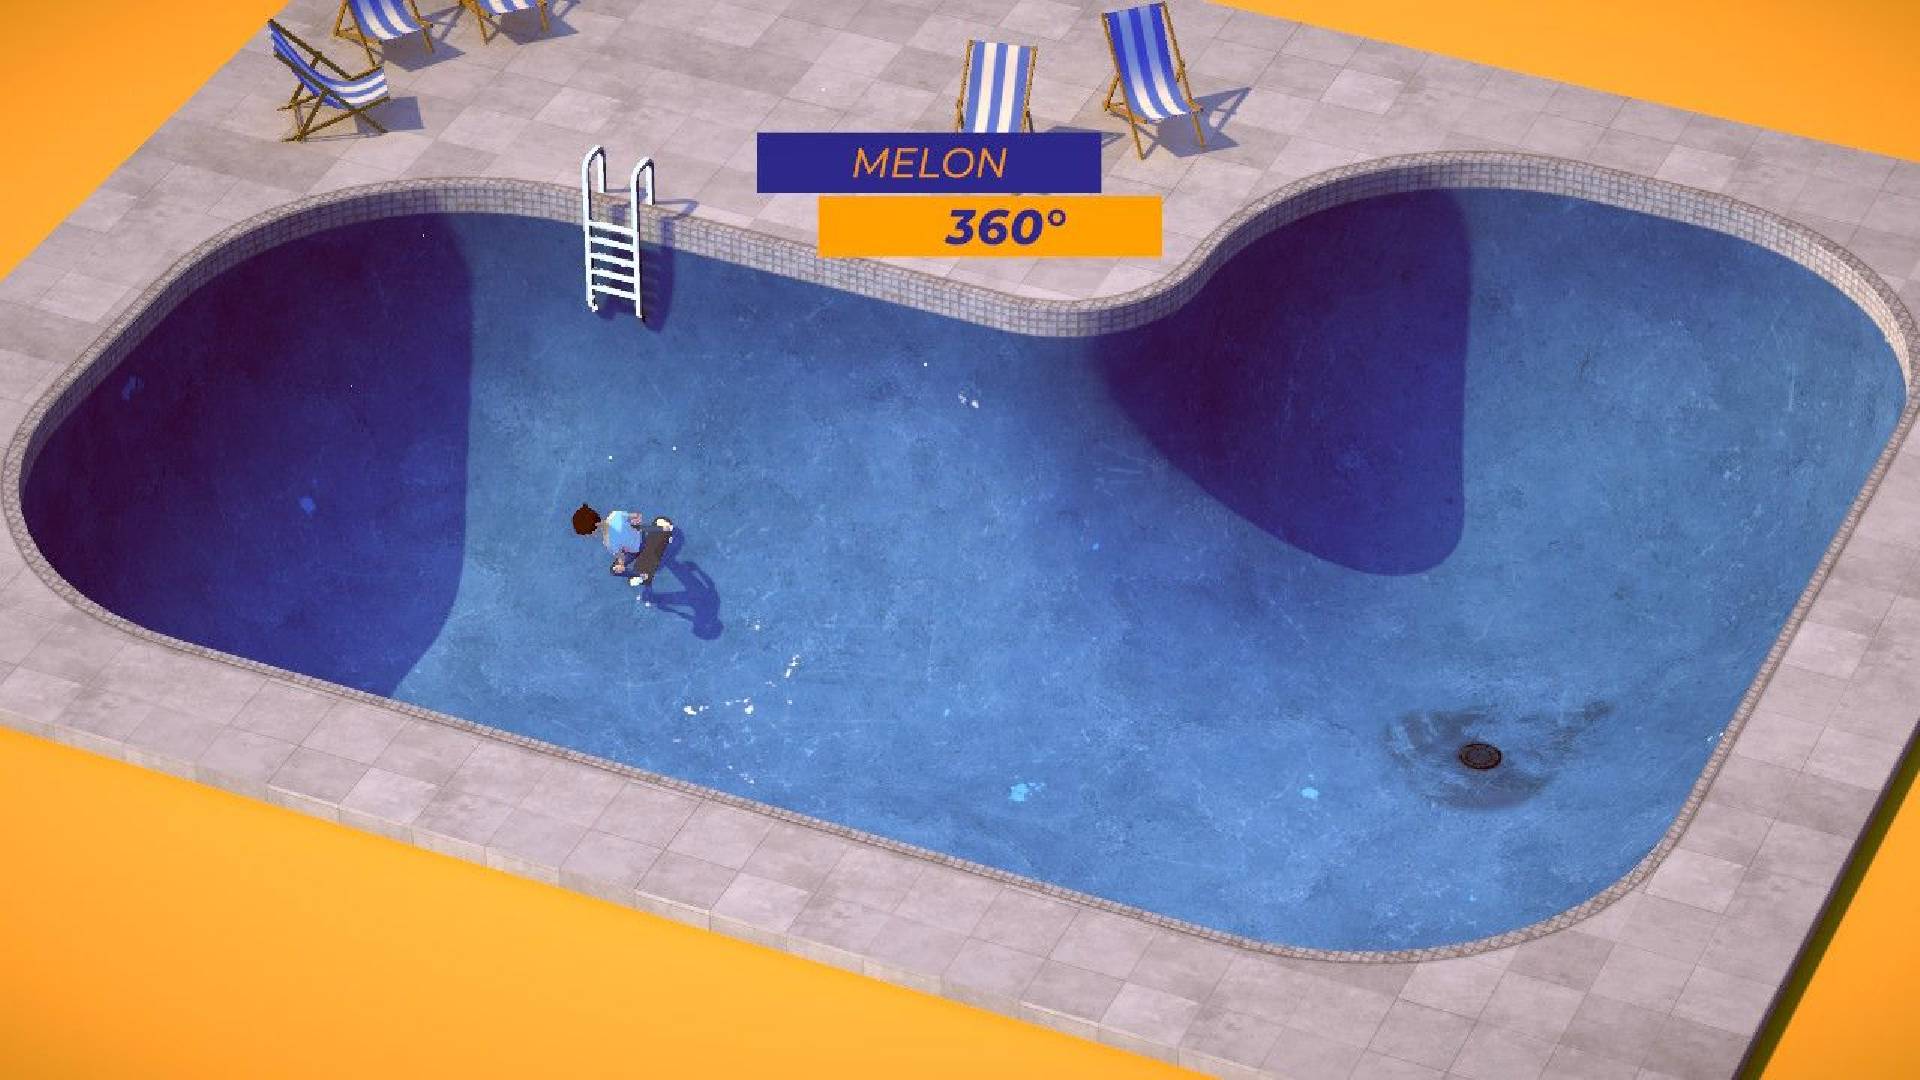 Best skateboarding games: an isometric skateboarding game is shown with a pool